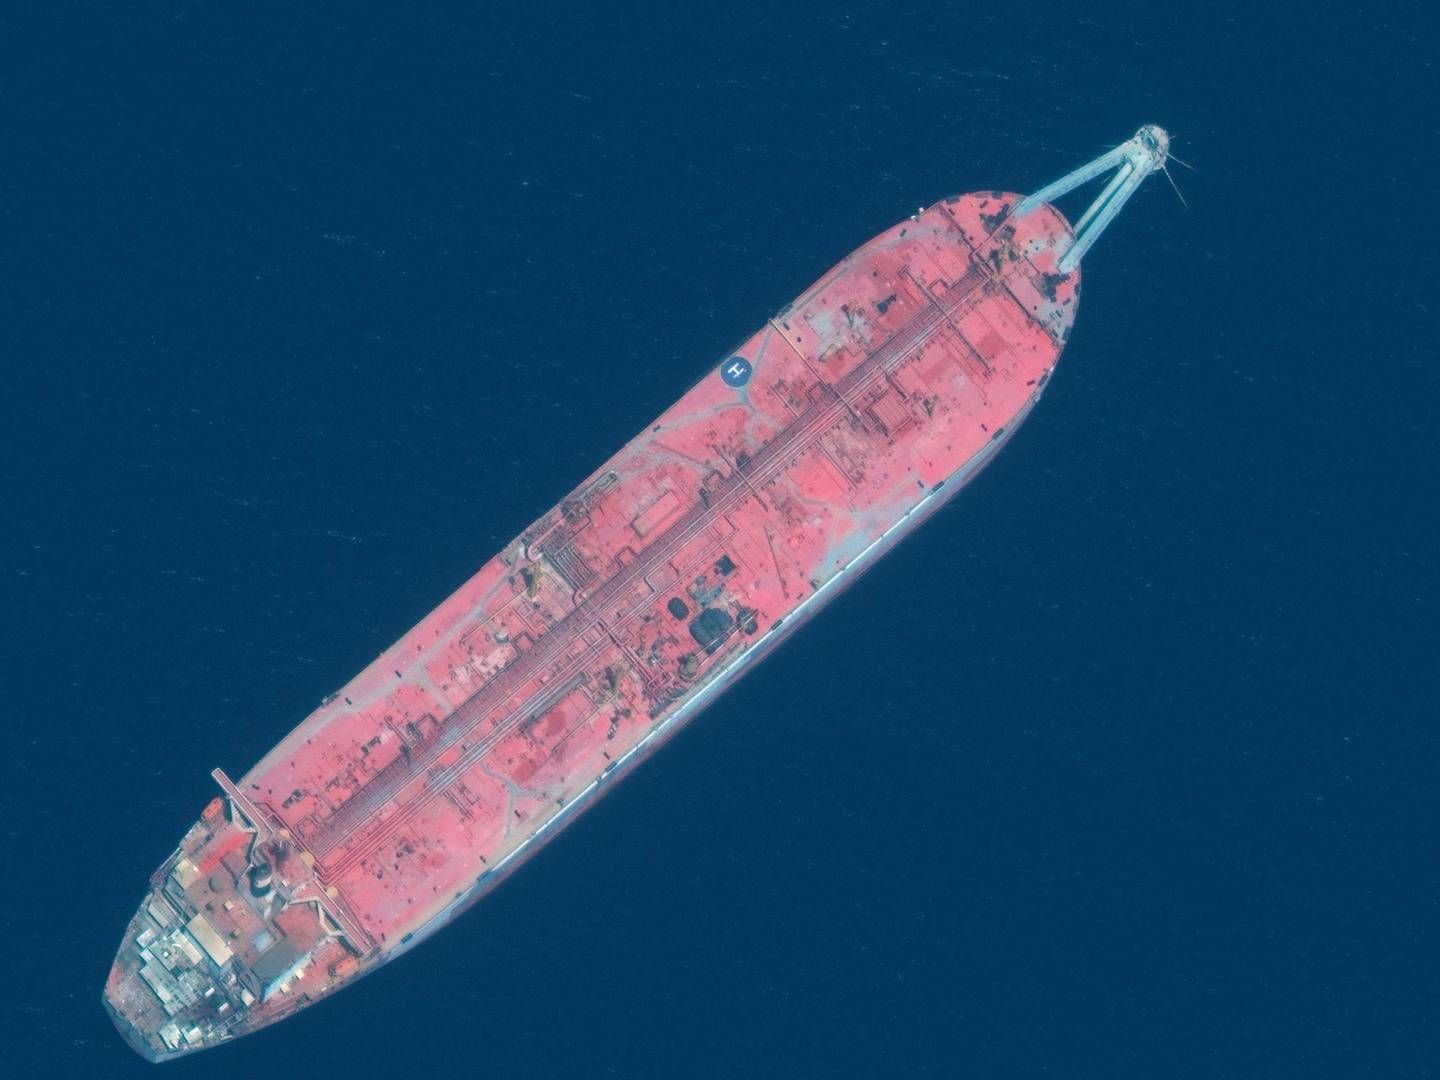 Air photo of FSO Safer from July 19, 2020. | Photo: -/AFP / Satellite image ©2020 Maxa